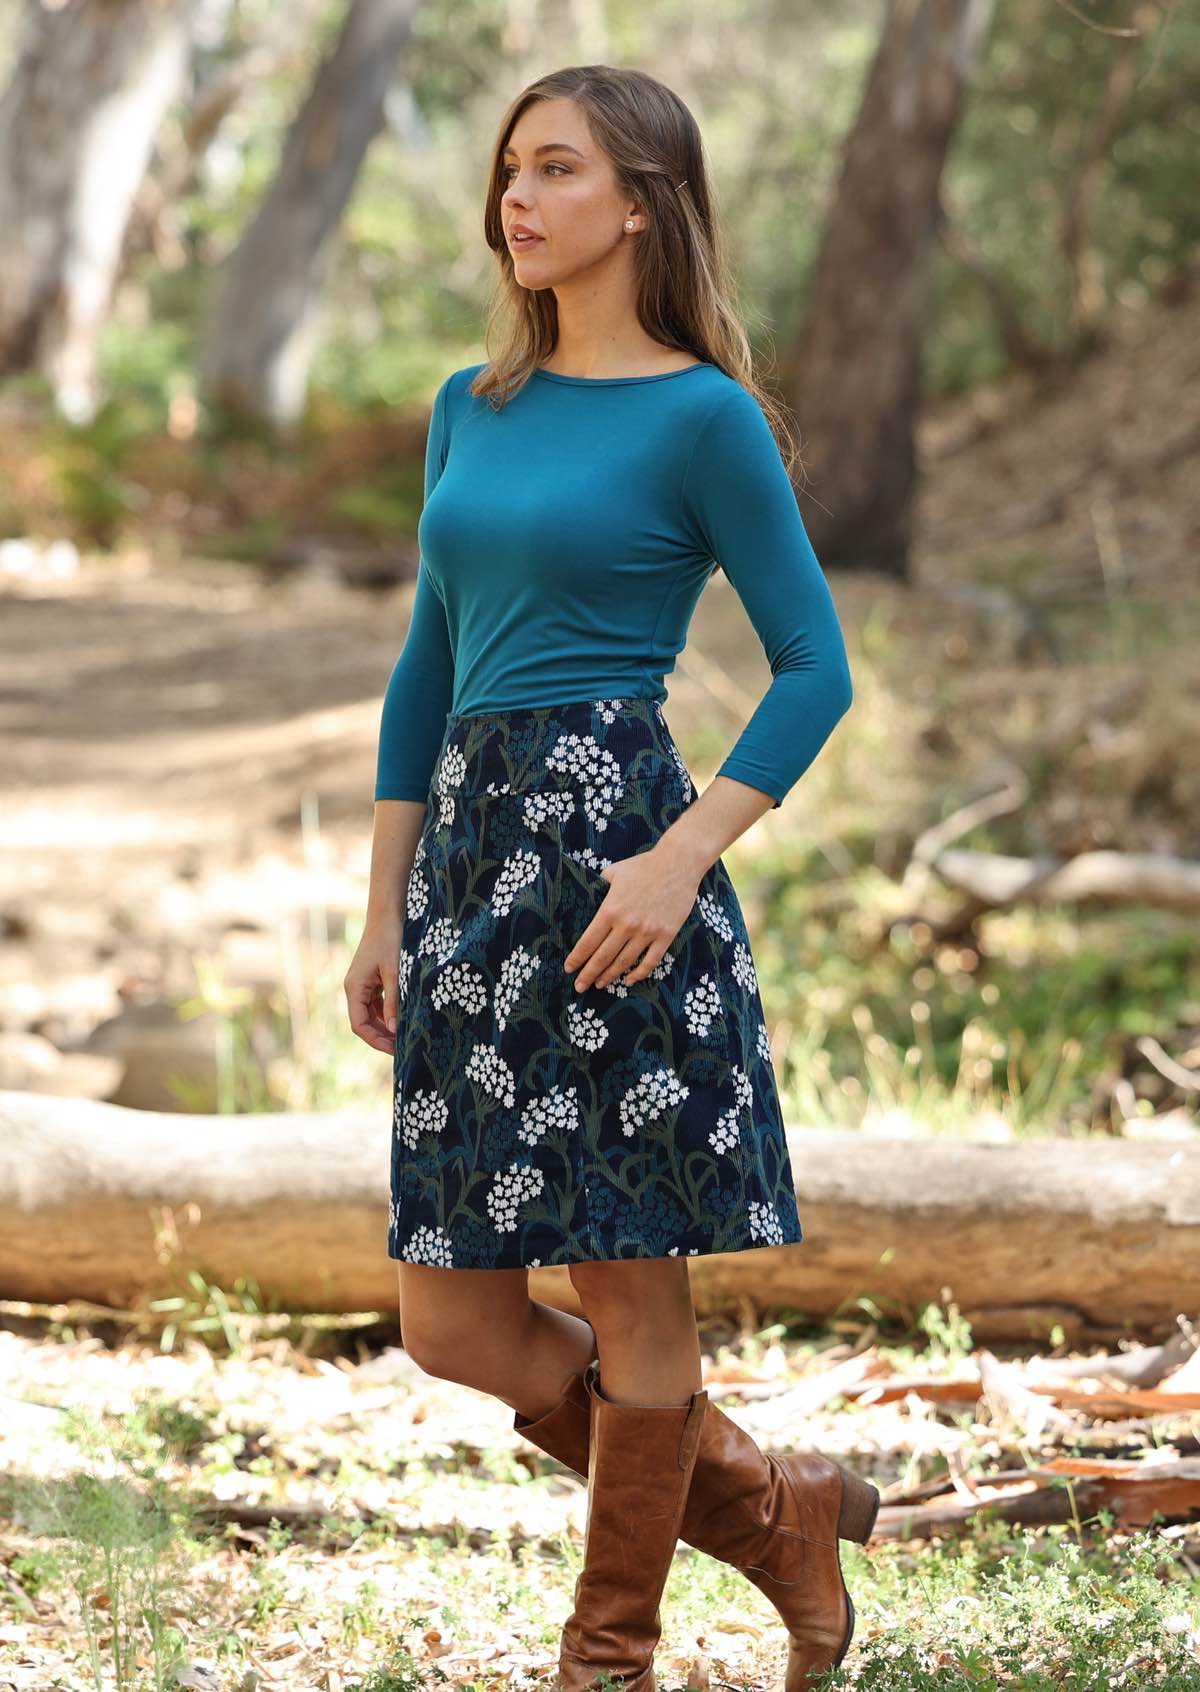 A-line corduroy skirt with floral print on dark blue base